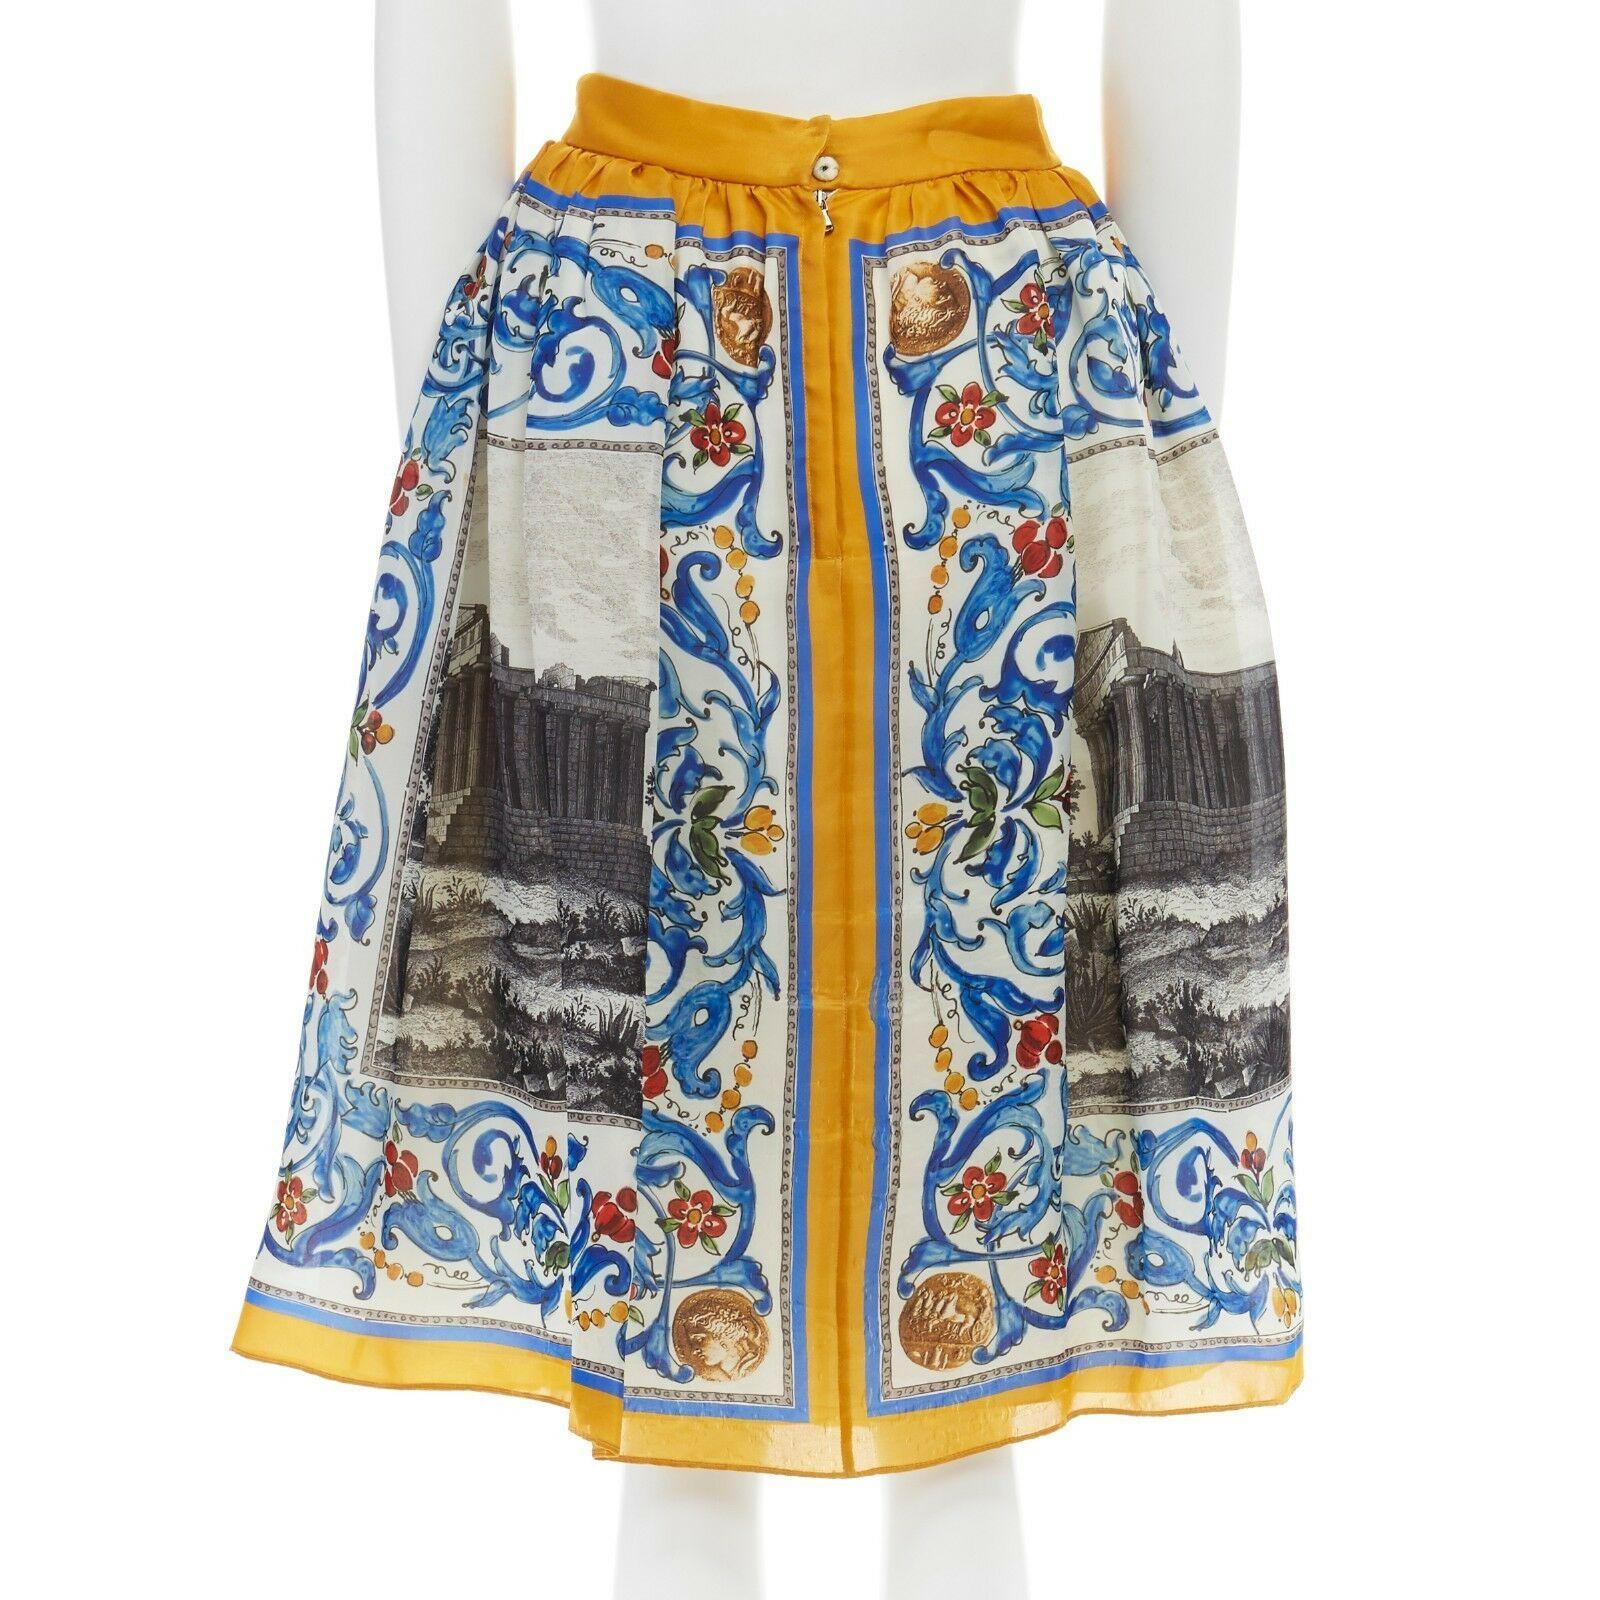 DOLCE GABBANA 100% silk blue yellow Majolica roman print flare skirt IT38 XS
DOLCE & GABBANA
100% silk. Yellow and blue Majolica print. Roman coin and architecture print. Flat waistband. Pleated at waist. Concealed button and zip back closure. Fully